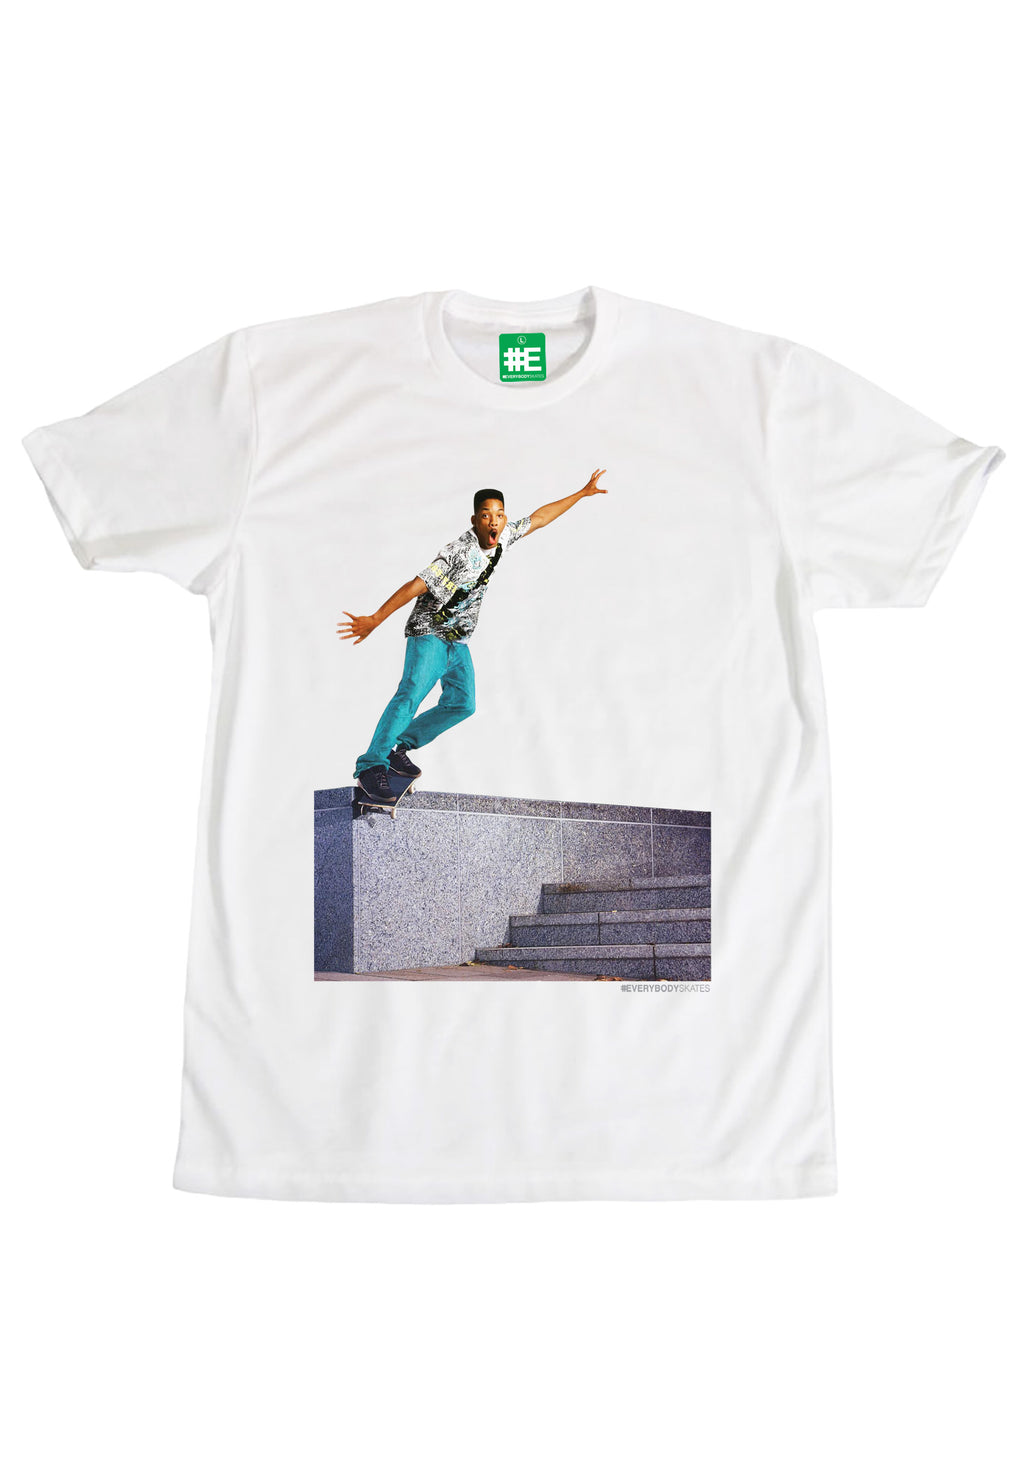 Big Willy Graphic t-shirt